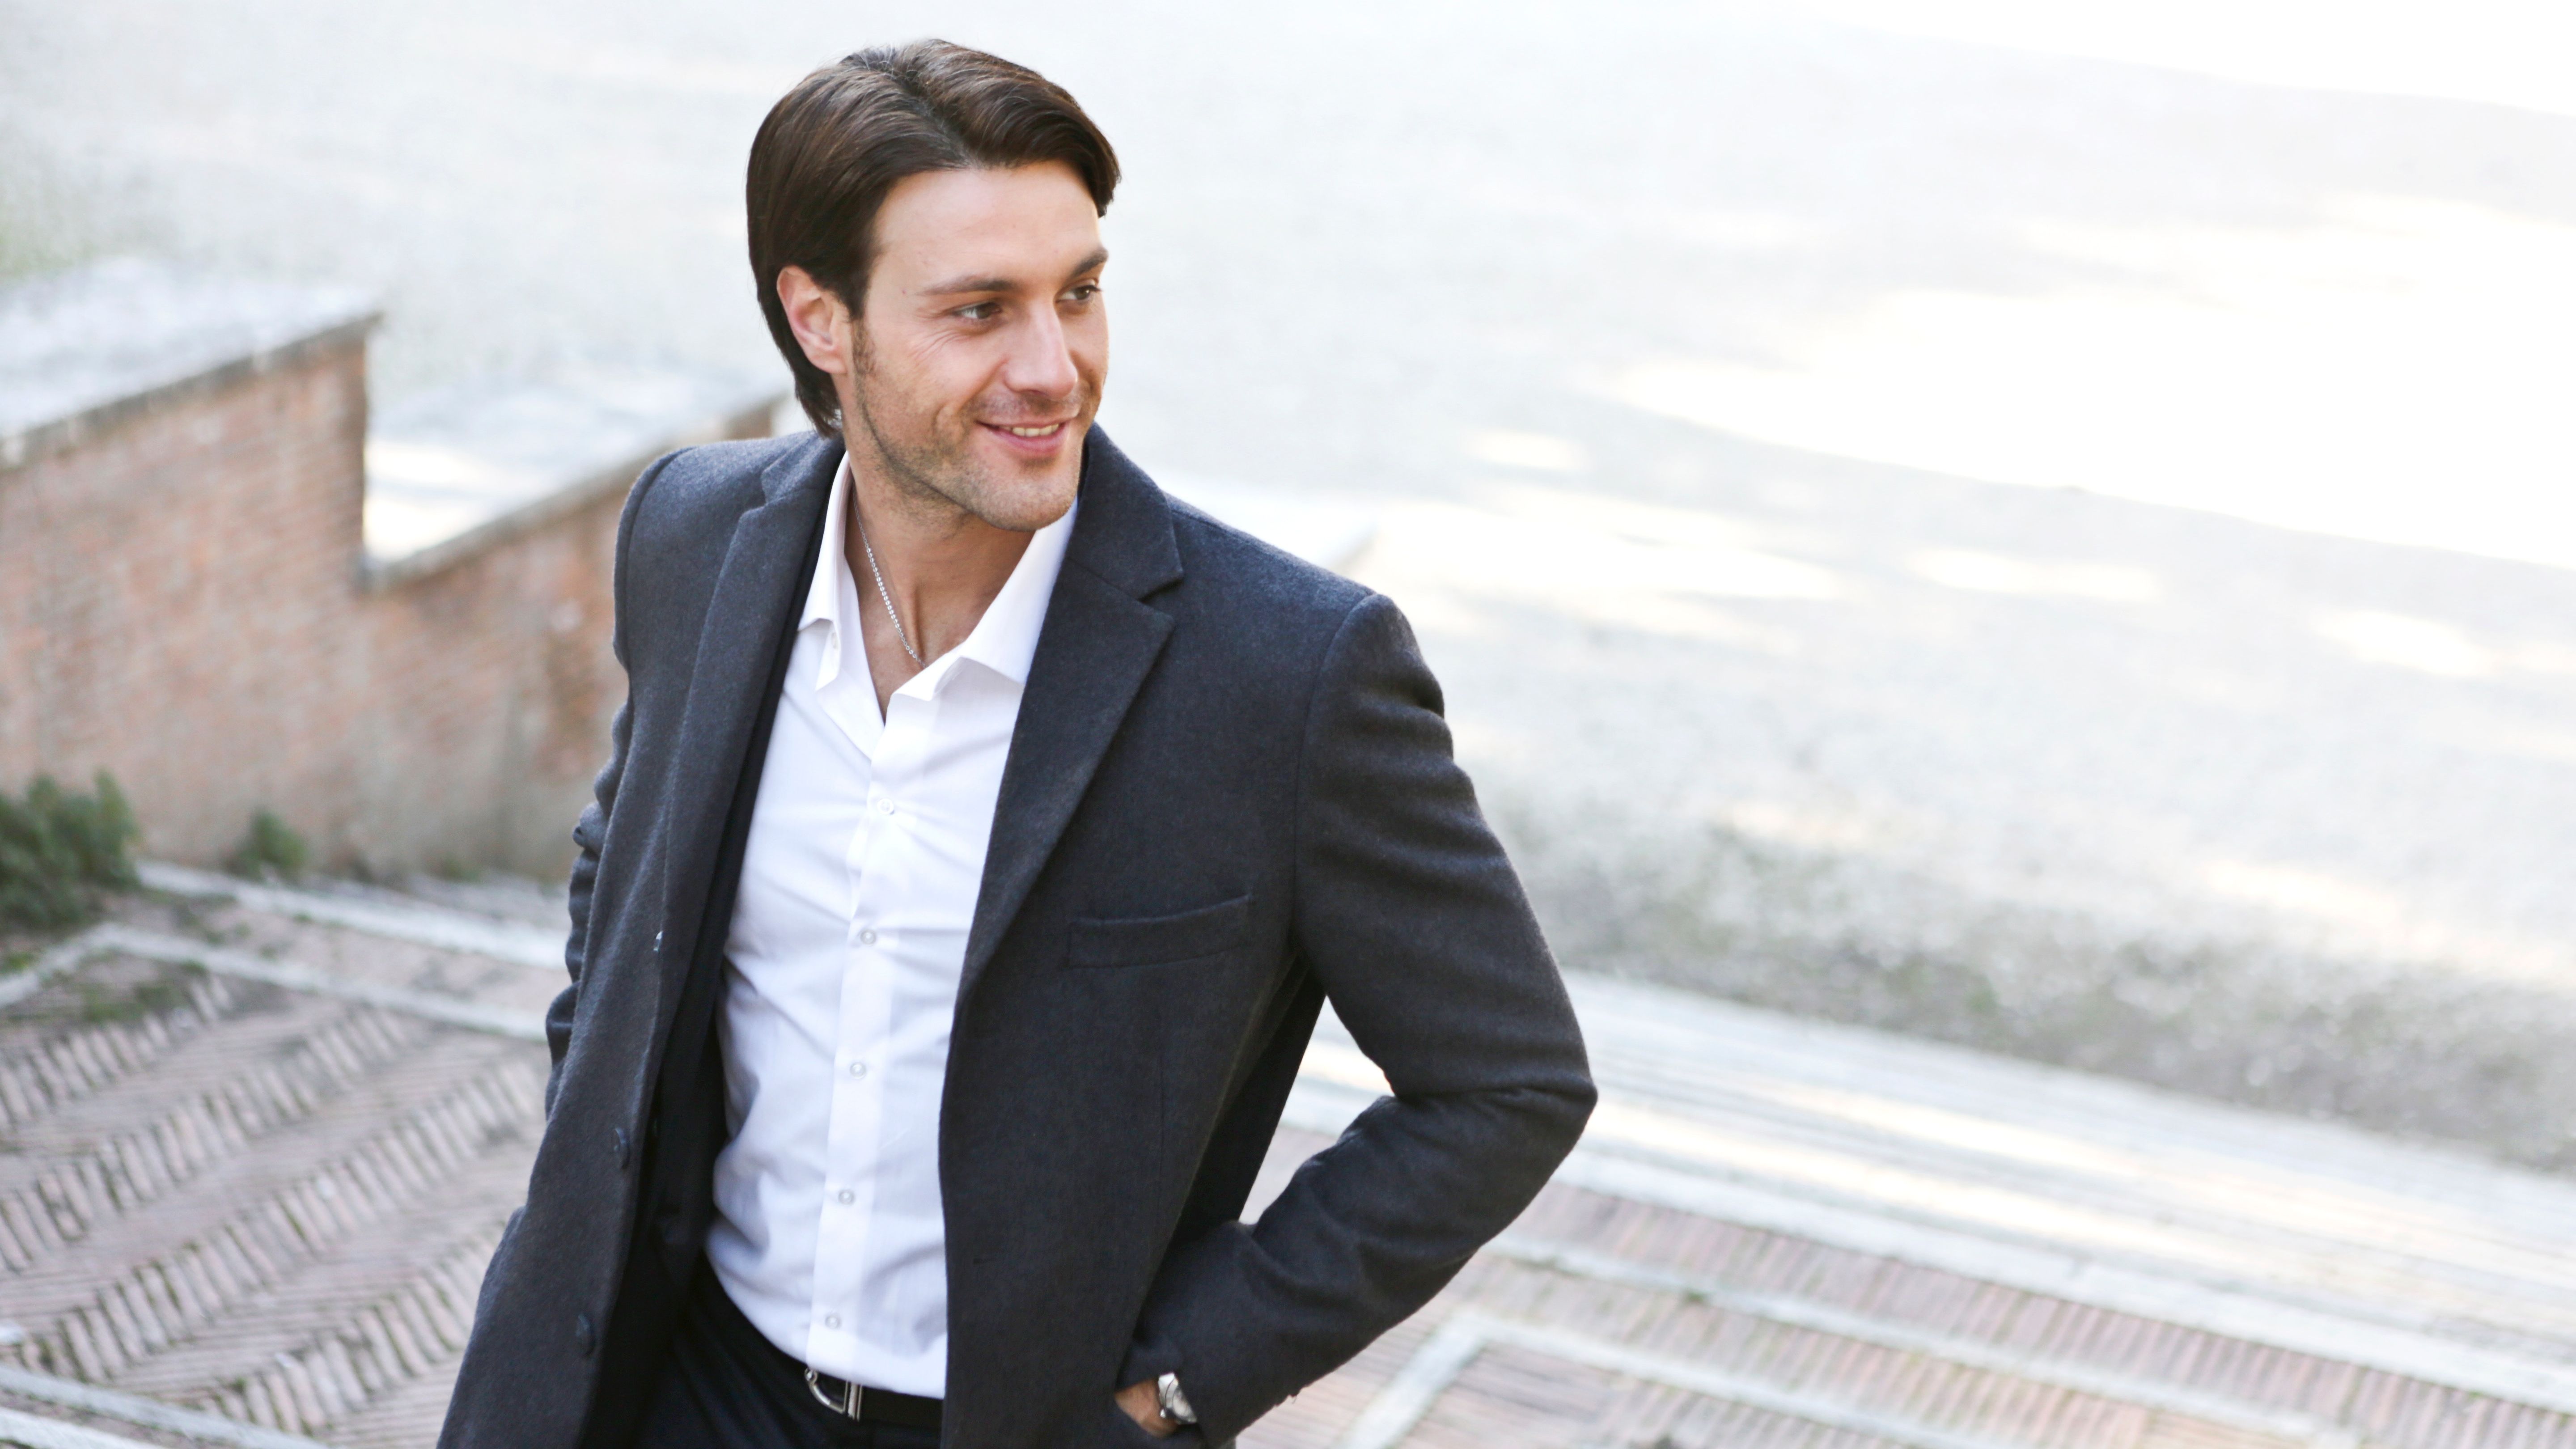 Gentleman with brown hair and smile